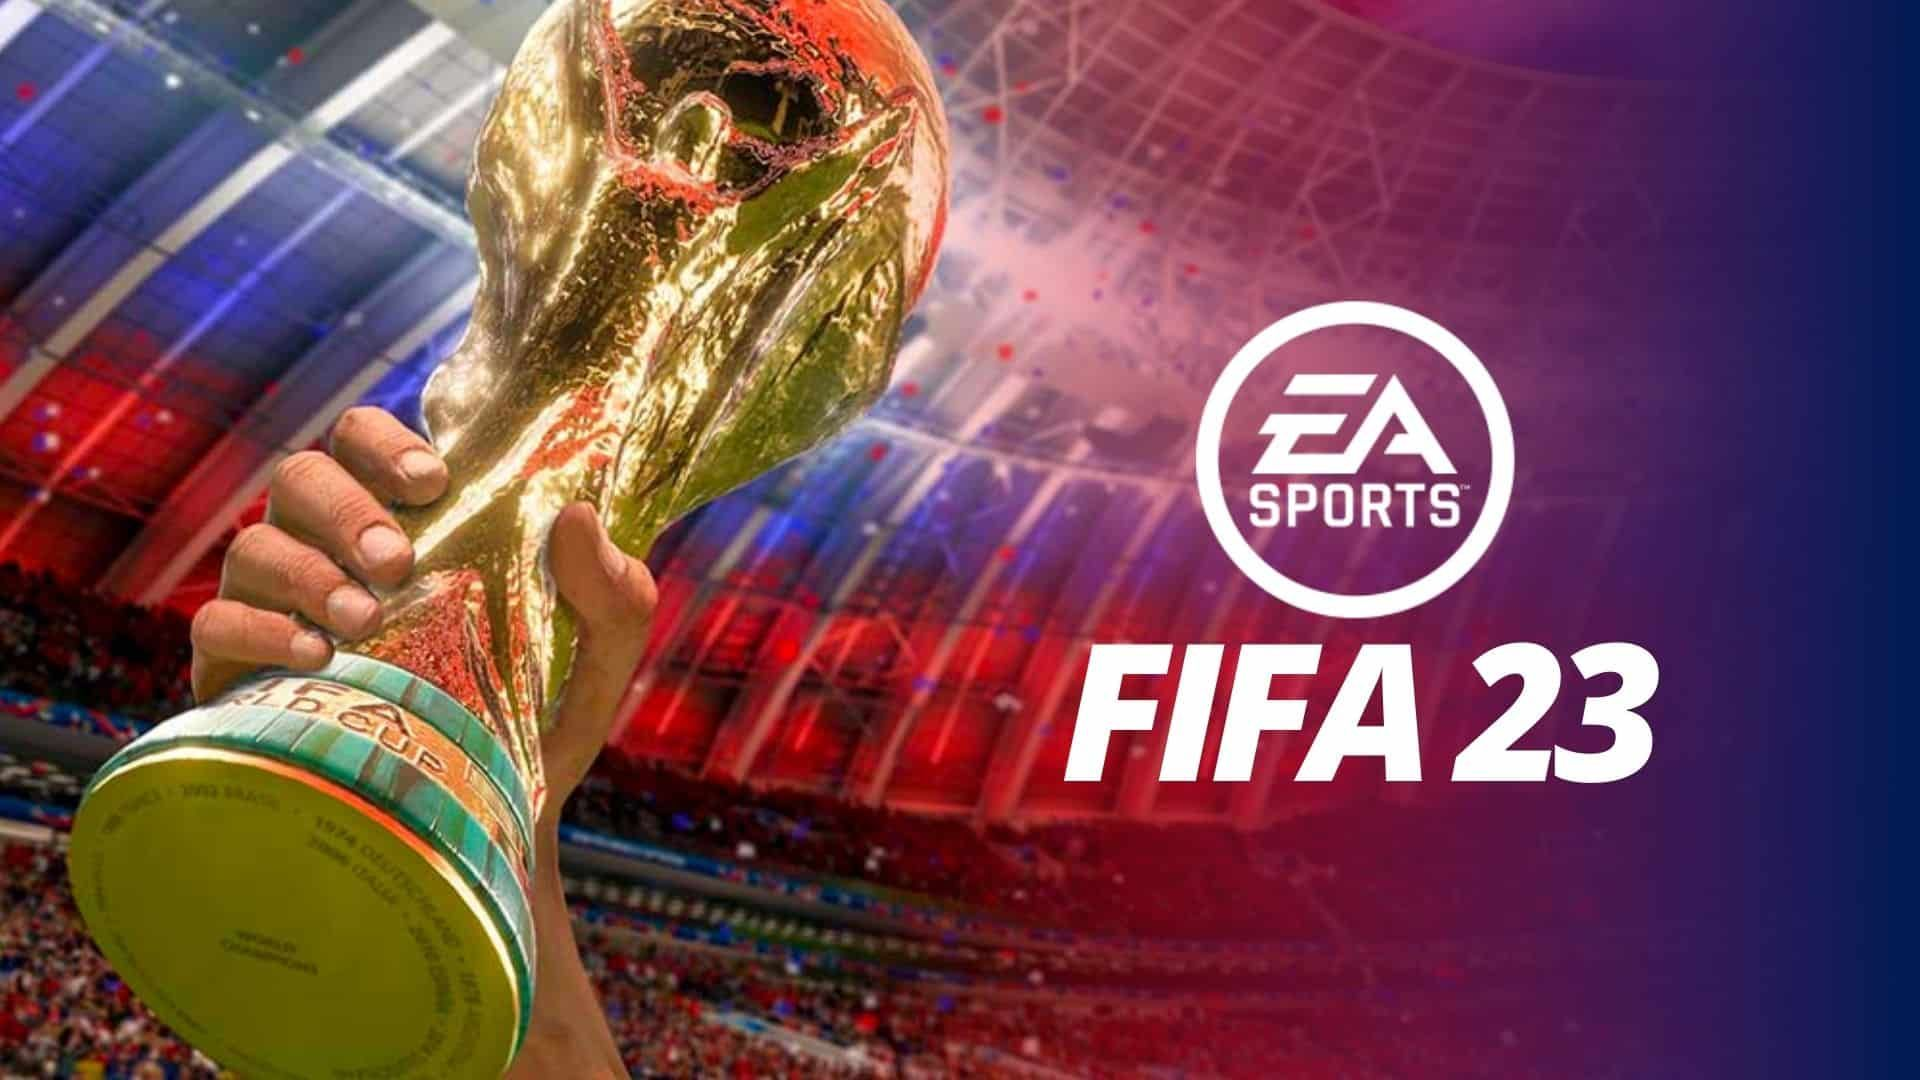 fifa 23, ea sports, ea play, ea sports logo, world's game, official fifa licensed product, ea sports fifa 23, ea sports women's club teams, career mode homegrown talent, fifa ultimate team, post launch updates, electronic arts inc, restrictions apply, fifa 23, ea sports, ea play, 